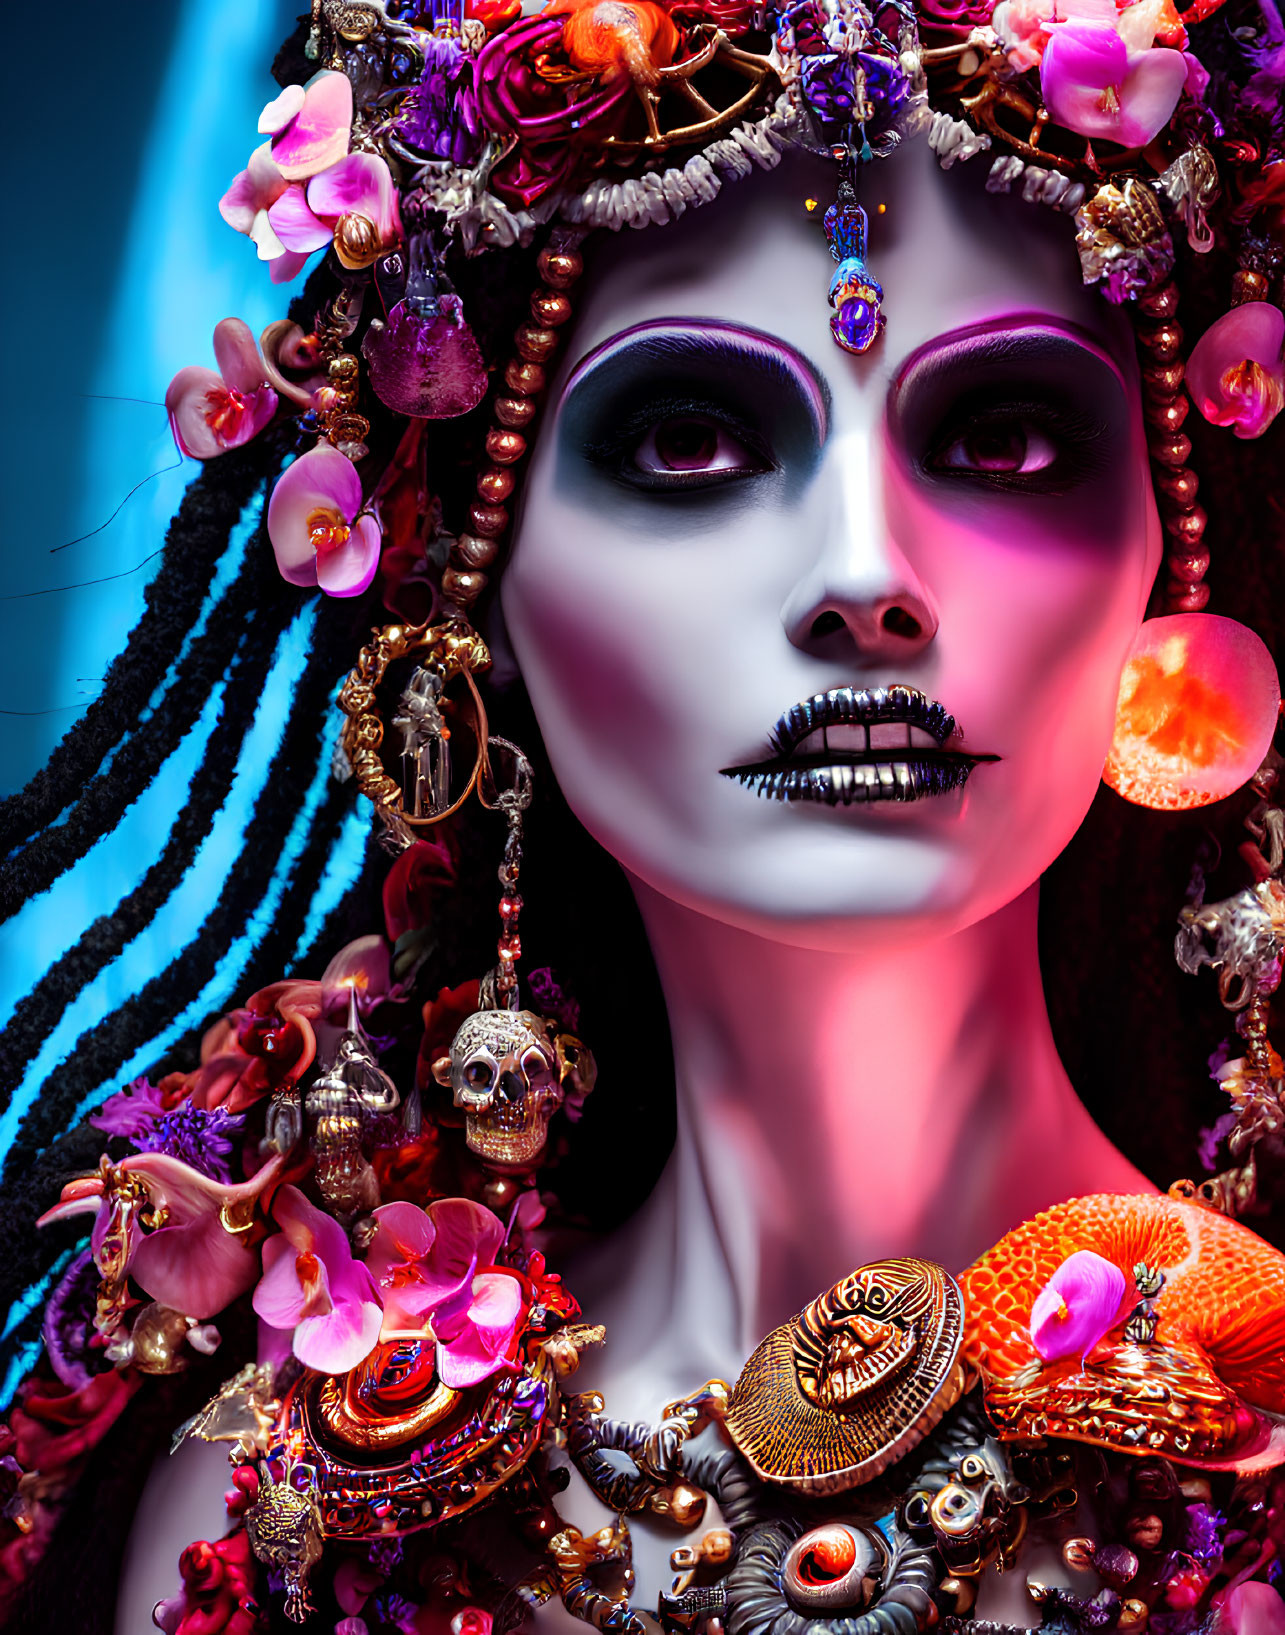 Elaborate skull makeup with colorful flowers, beads, and jewelry